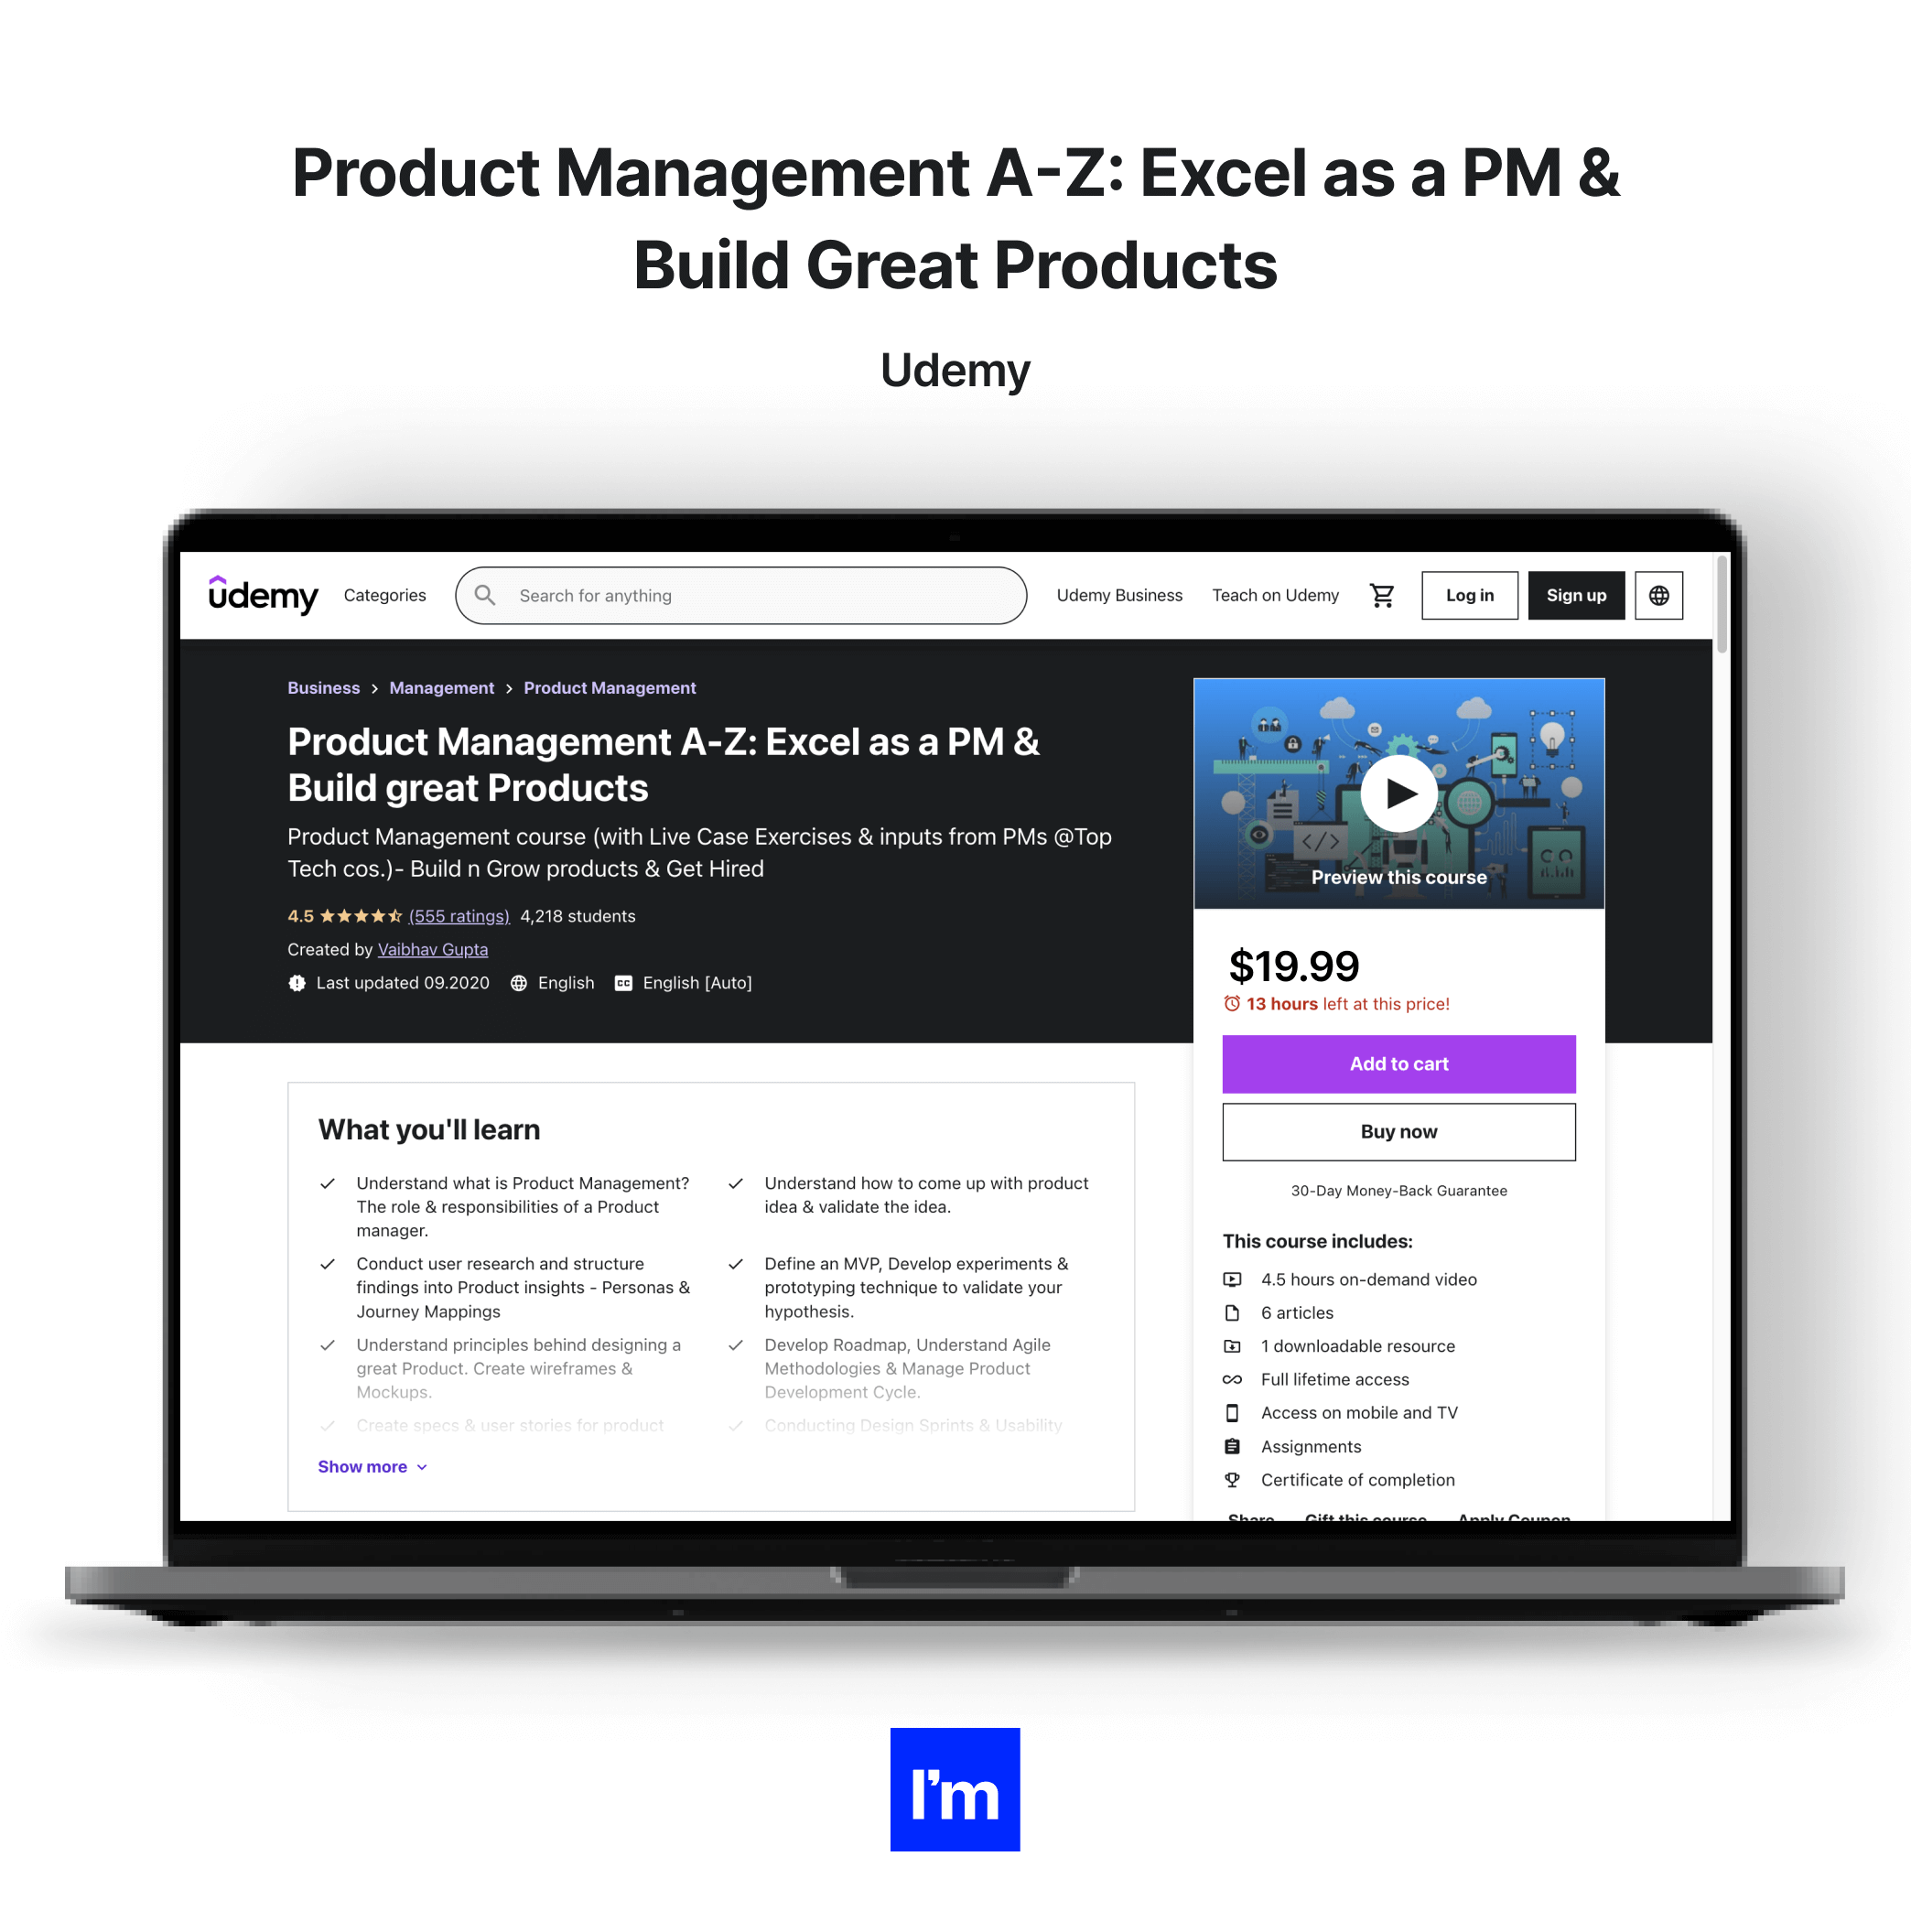 Top 10 Product Management Certification Programs - Product Management A-Z: Excel as a PM & Build Great Products